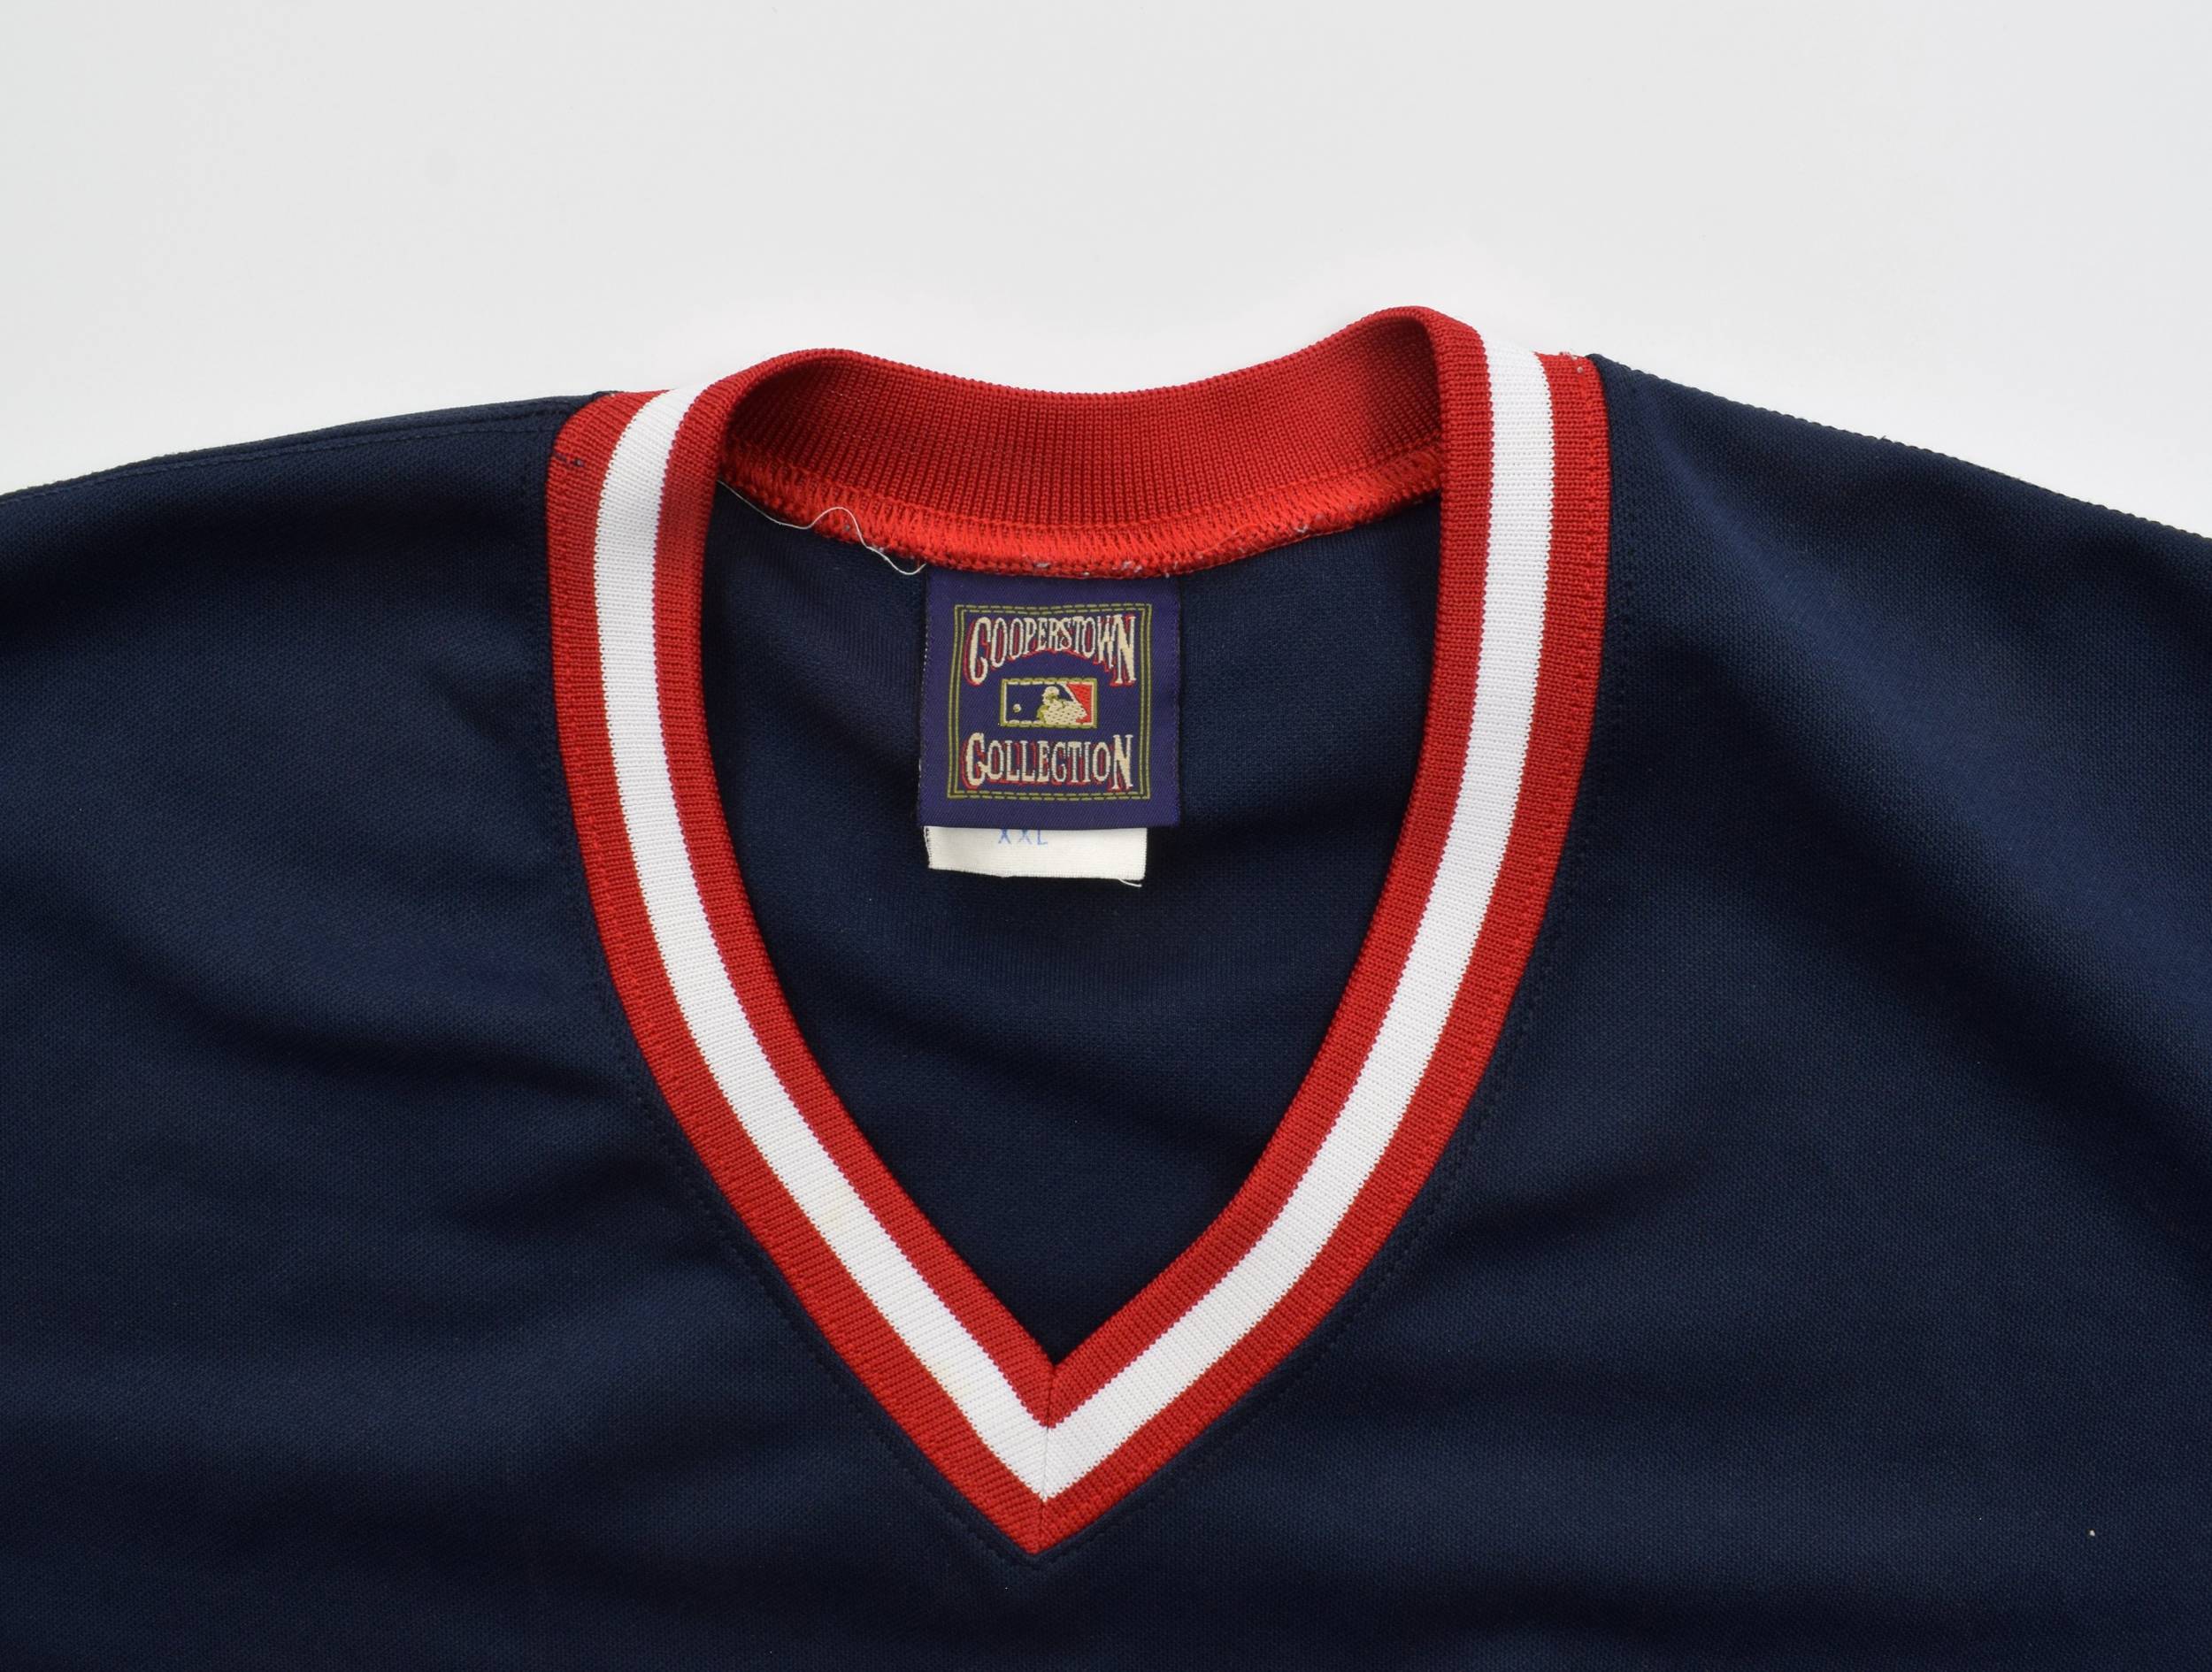 MLB Cooperstown Collection, Throwback MLB Jerseys, Baseball Tees